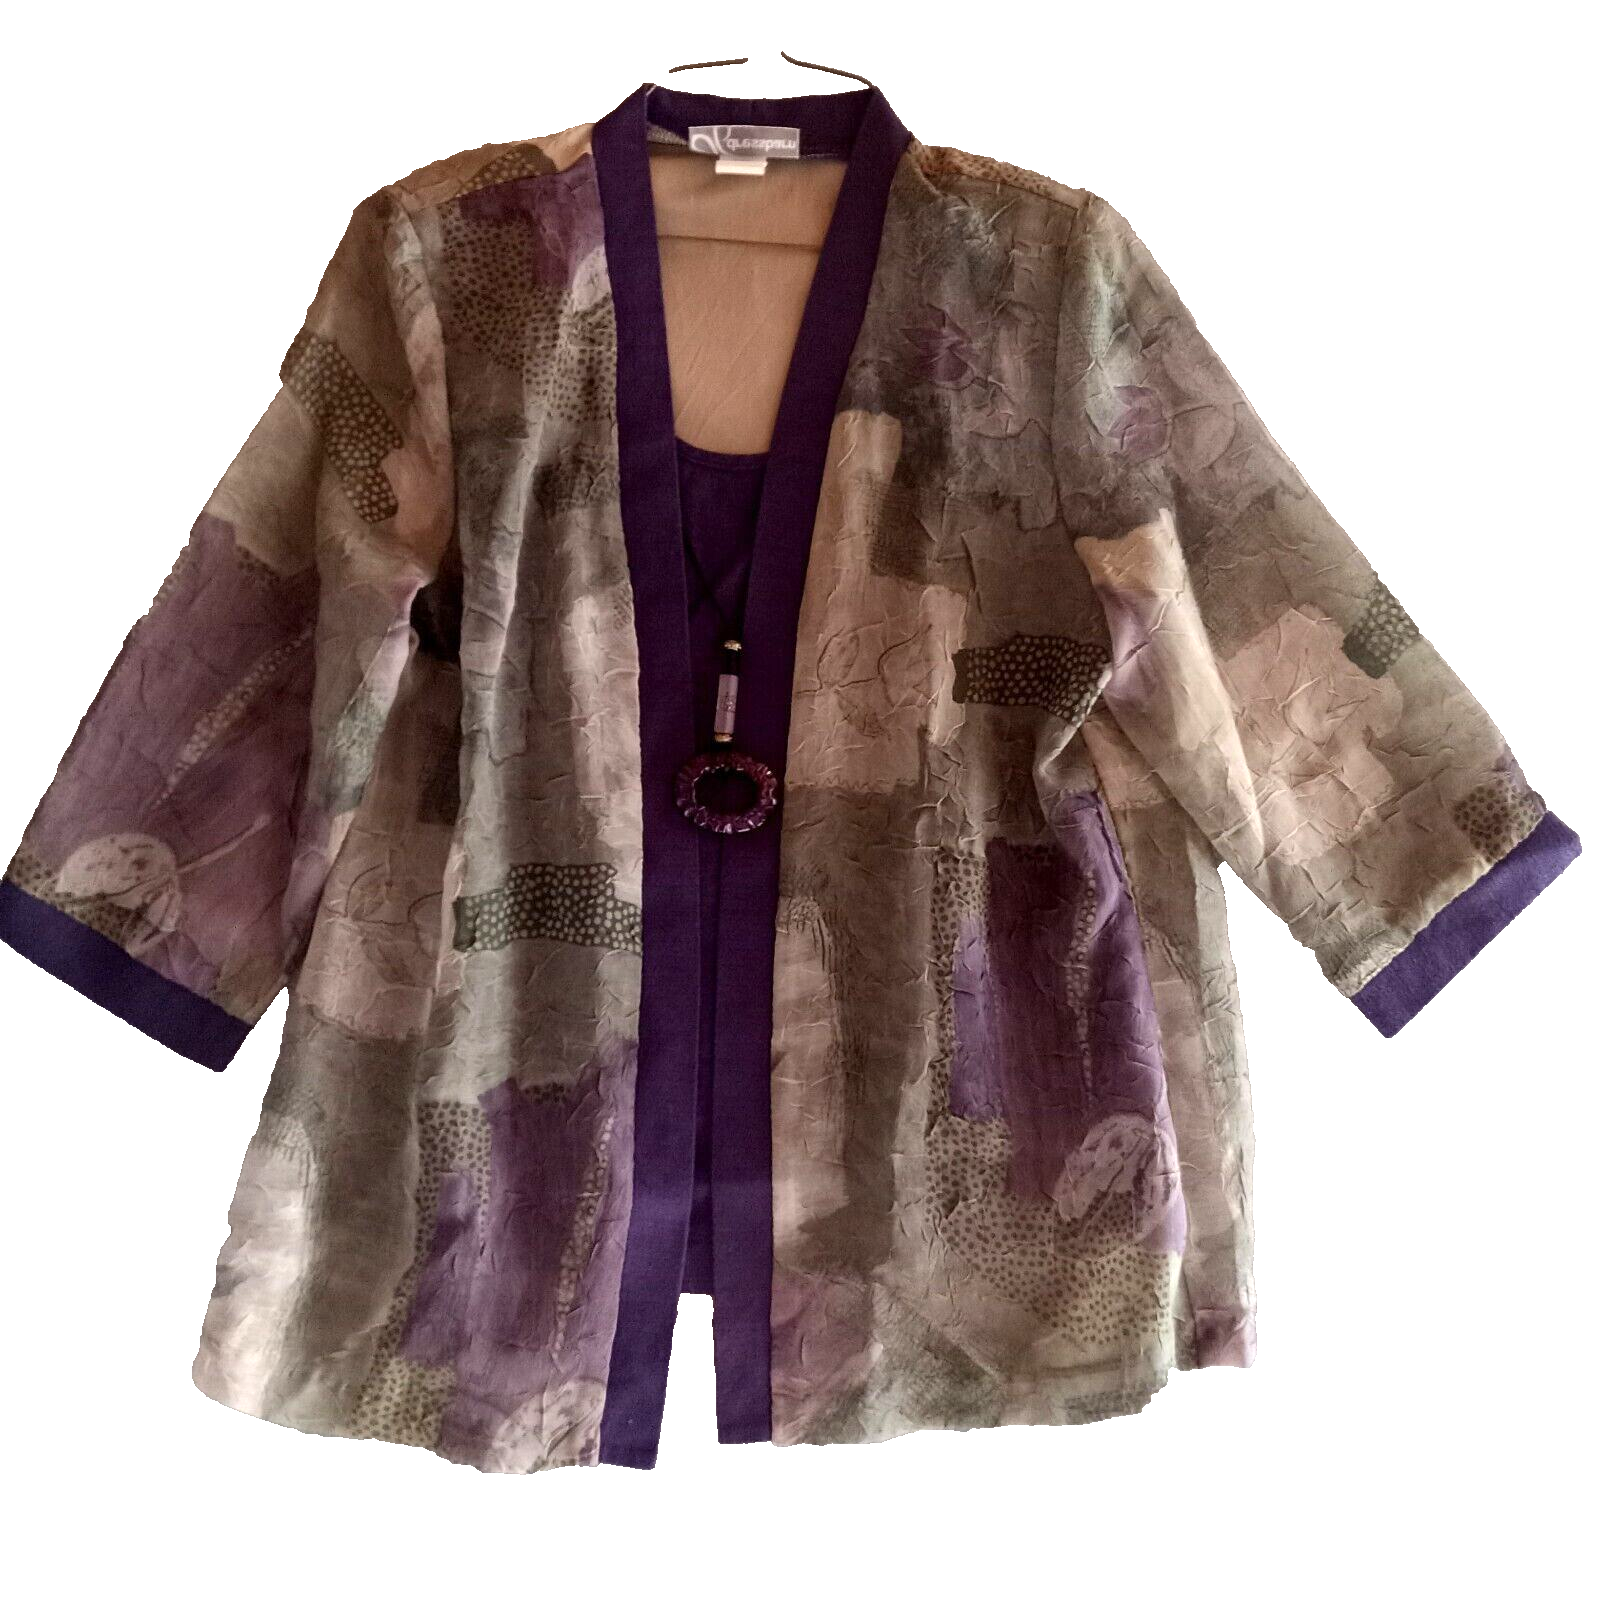 Primary image for Dress Barn Womens Top Tunic Floral Purple Green Medium Layered Necklace Comfort